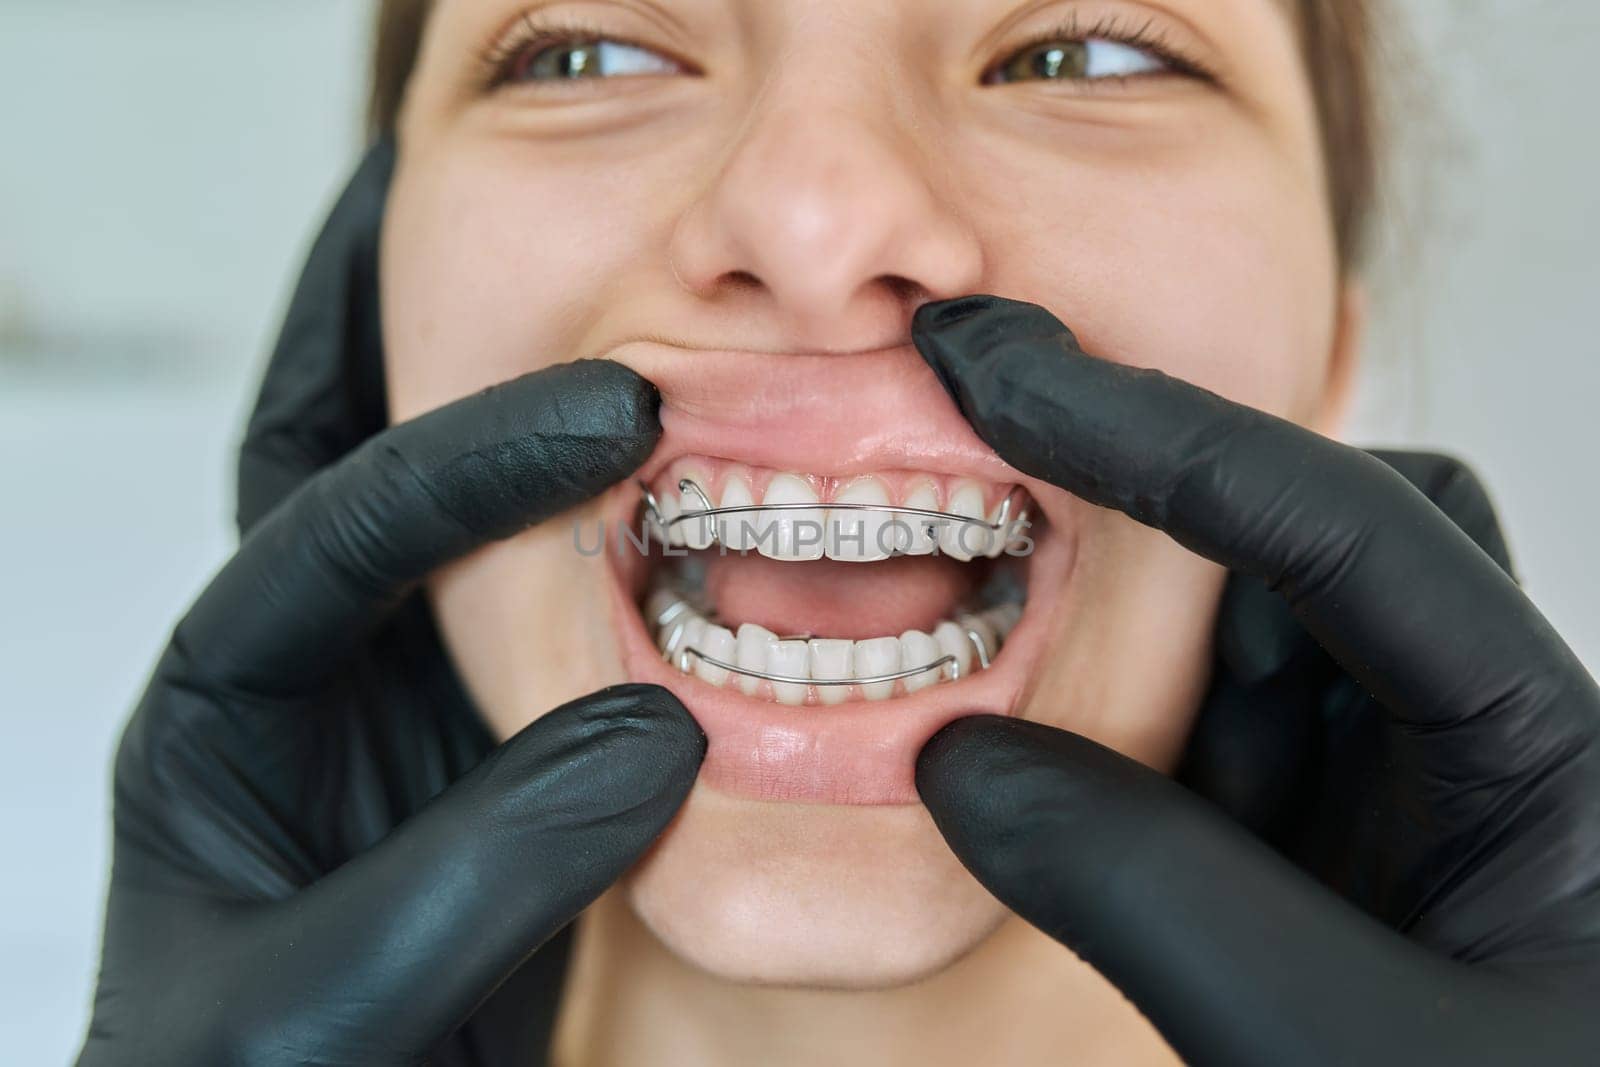 Close-up of face of teen girl with open mouth, teeth with metal orthodontic plate, hands of orthodontic doctor in medical gloves showing her teeth. Treatment dental care orthodontics dentistry health